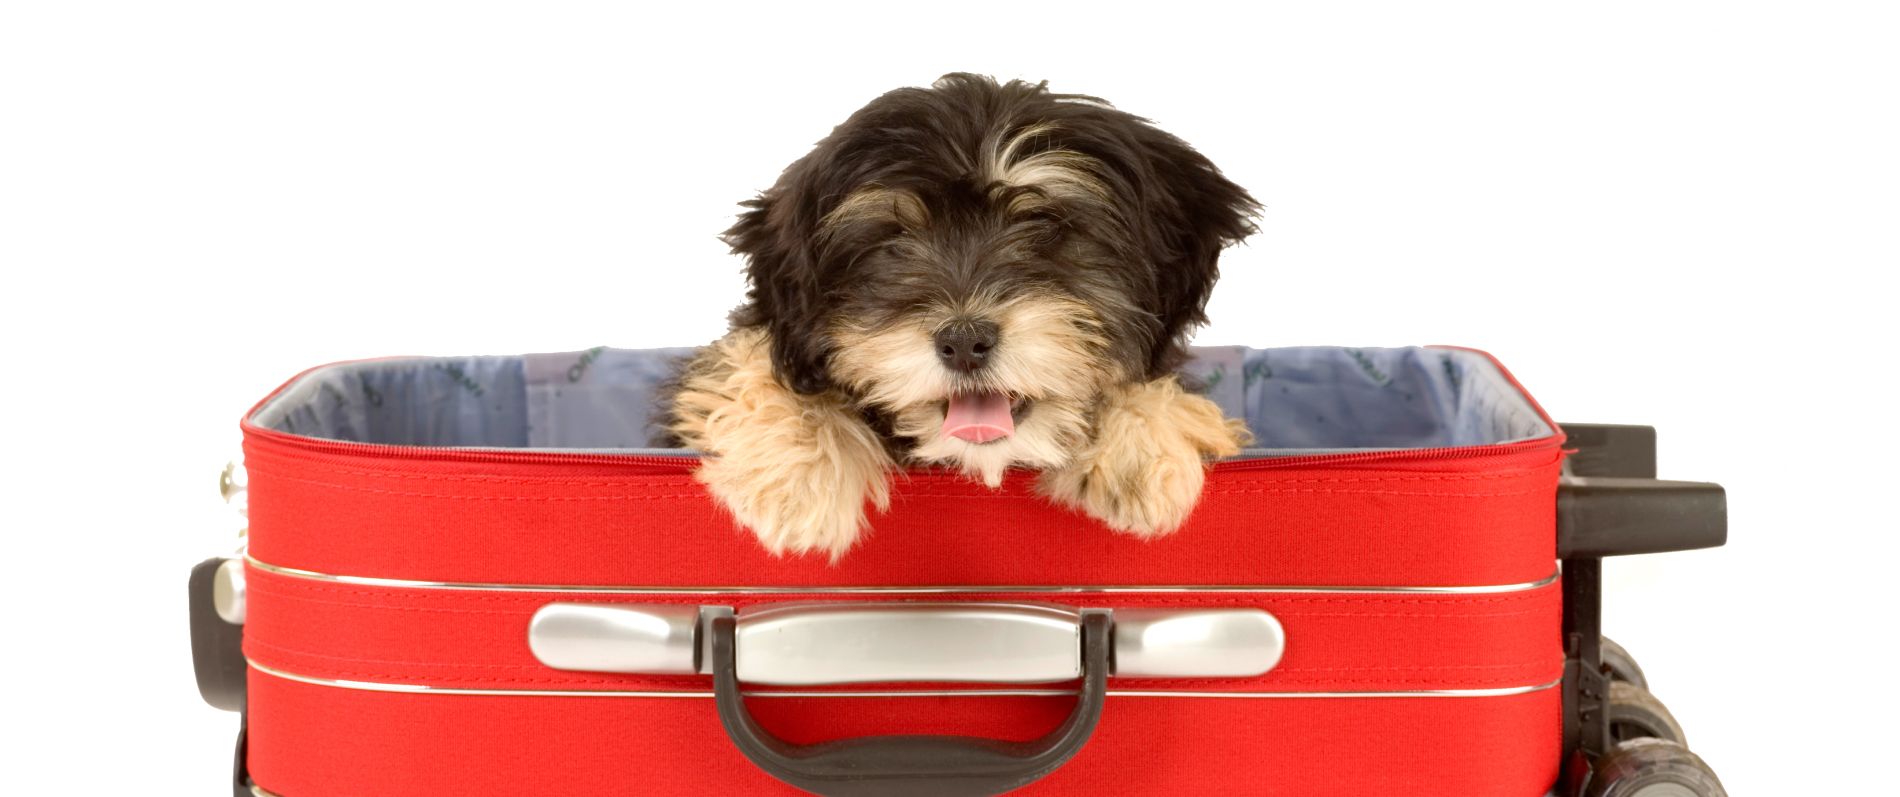 Fluffy puppy in suitcase